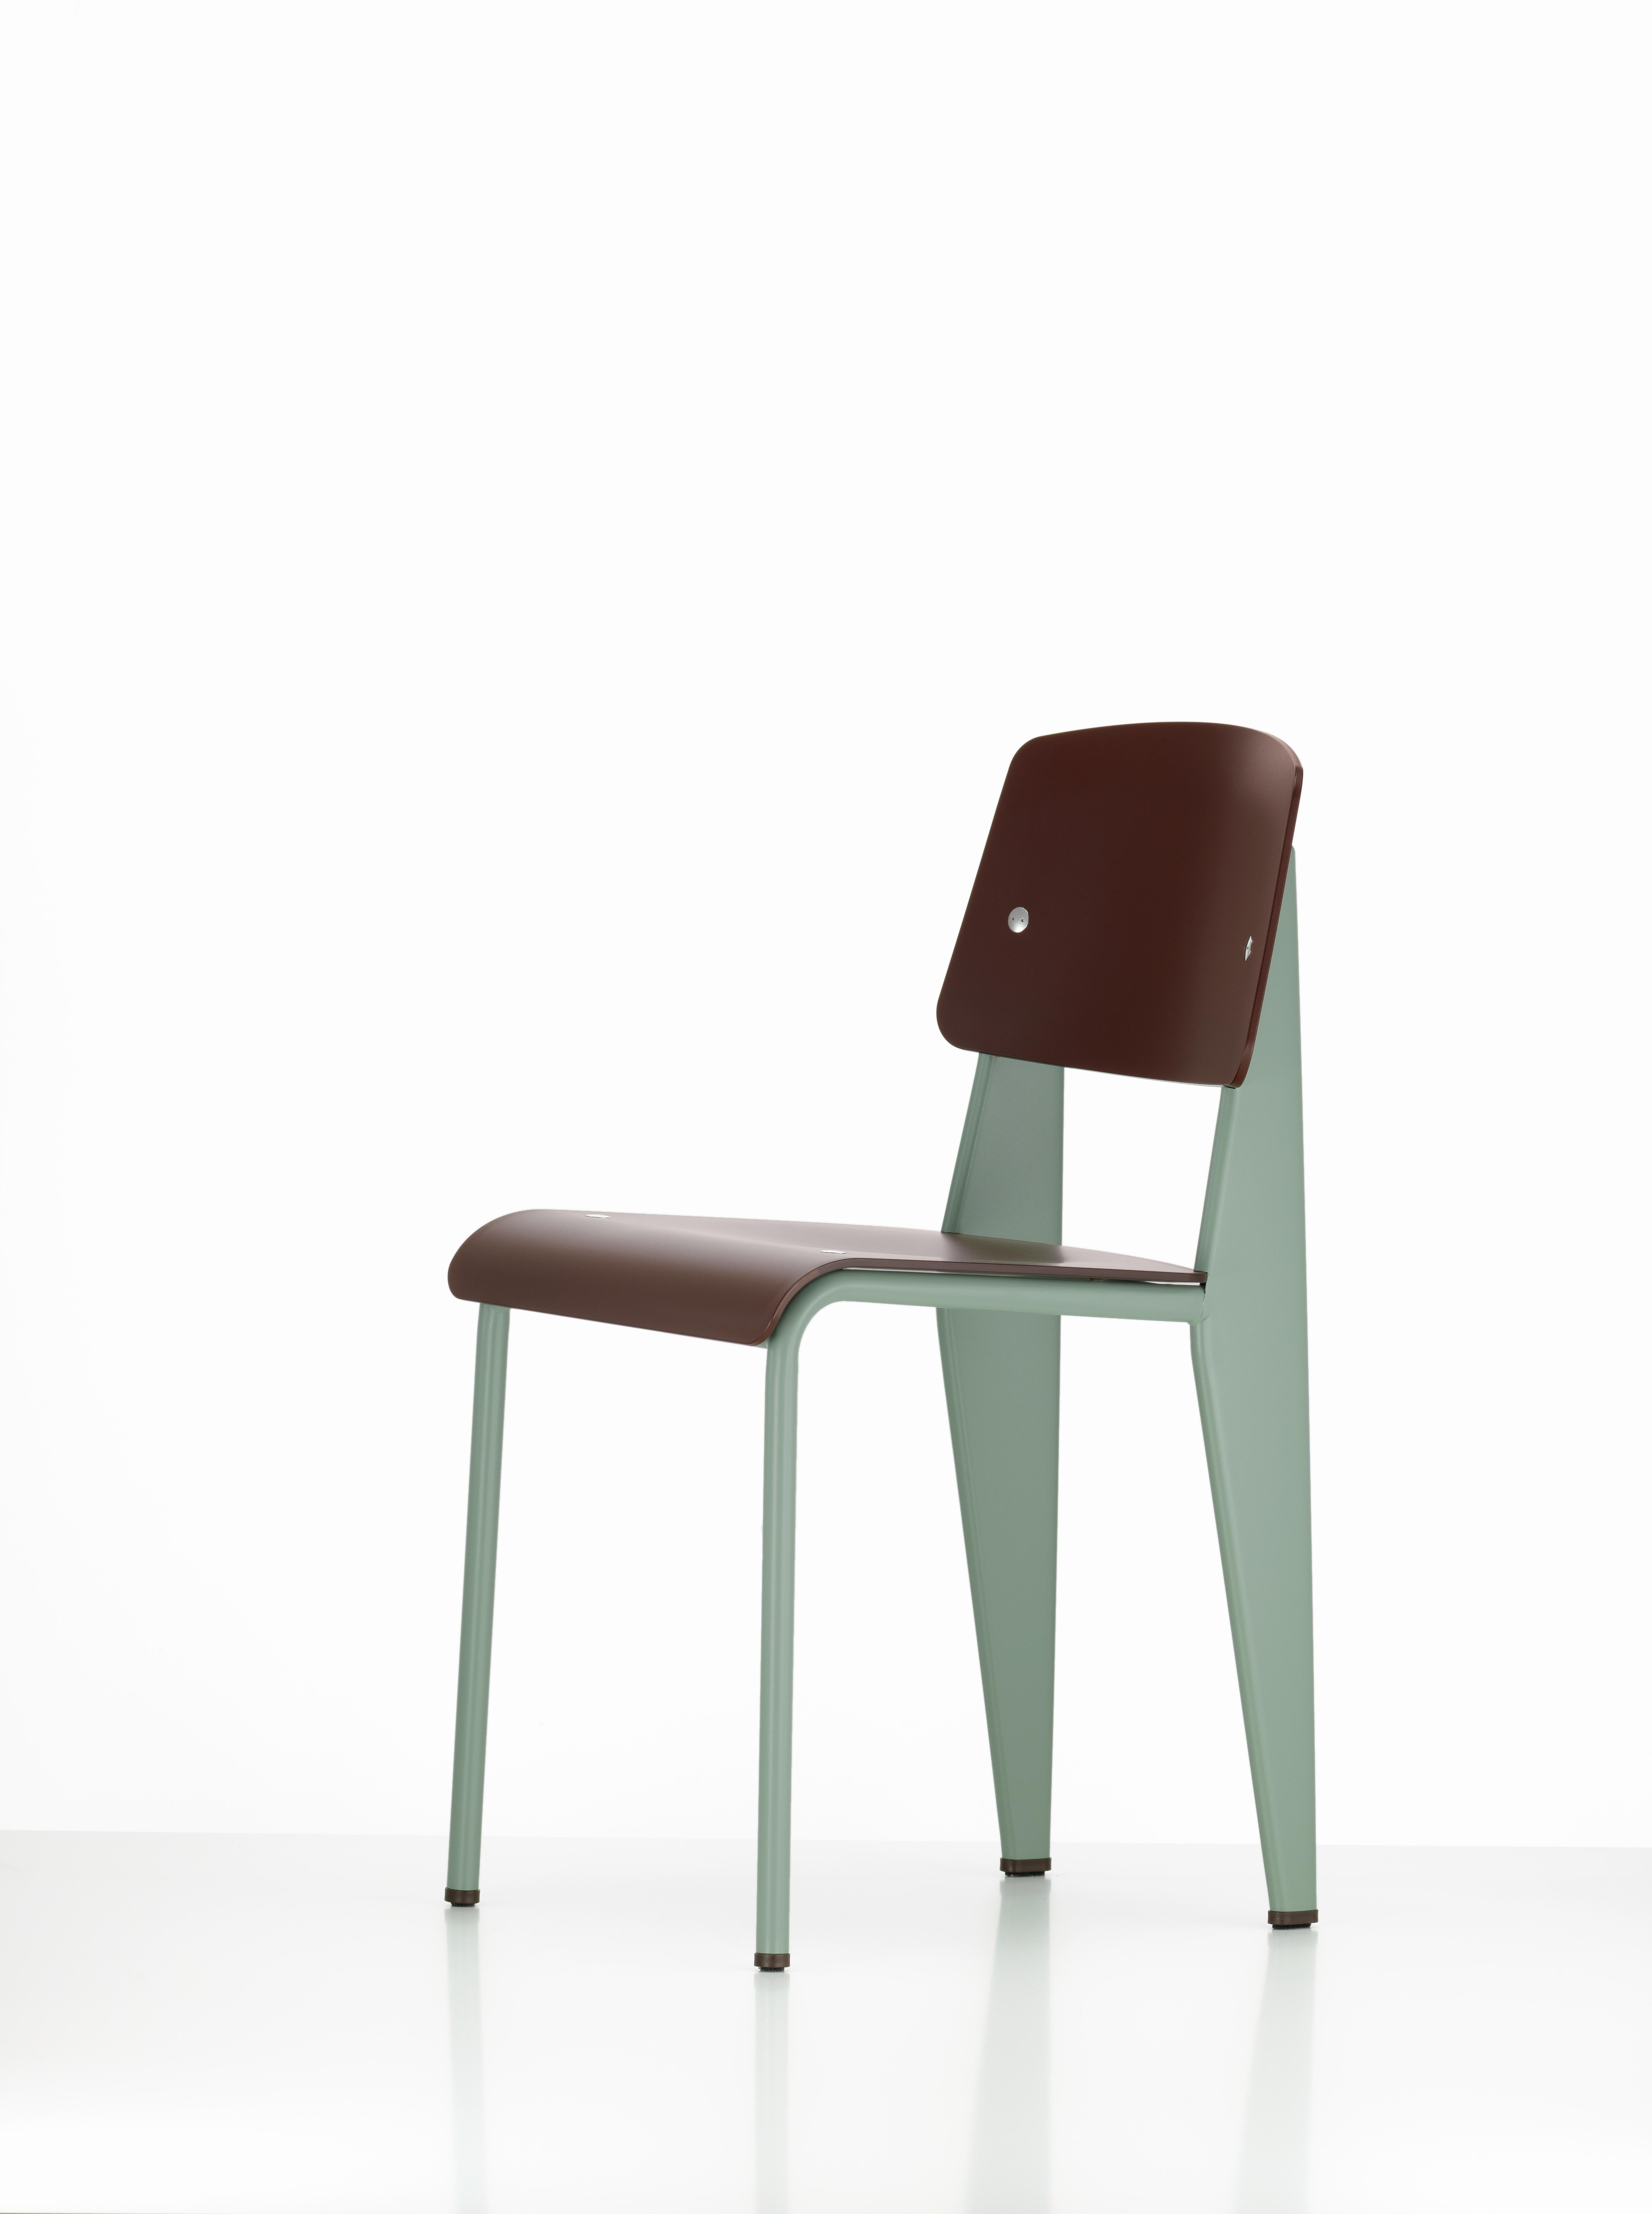 Jean Prouvé Standard Chair SP in Olive and Ecru White for Vitra 6